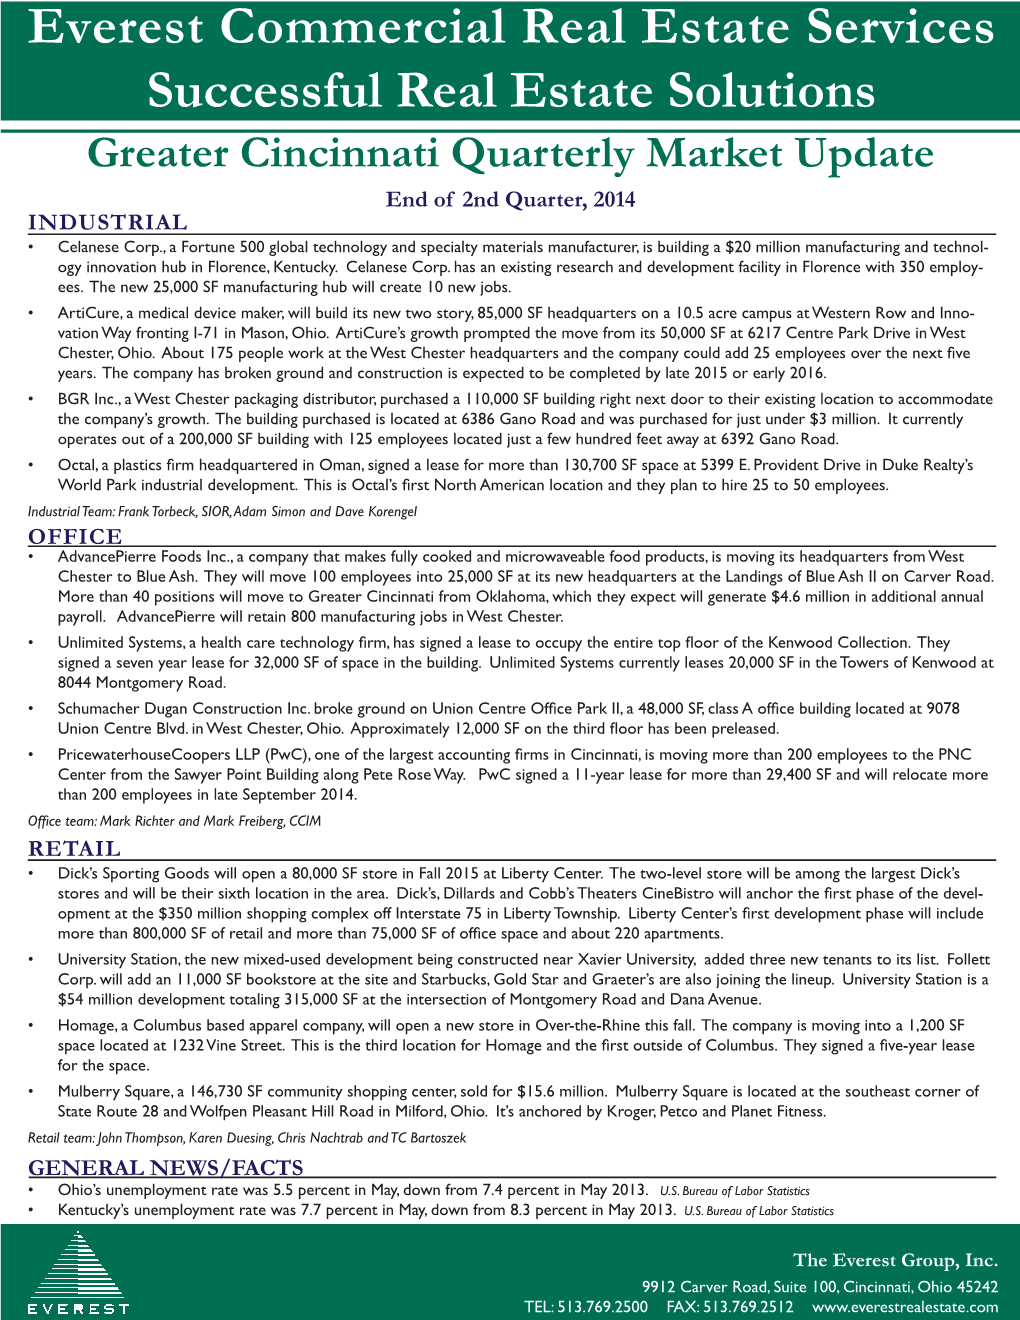 End of 2Nd Qtr. 2014 Market Report